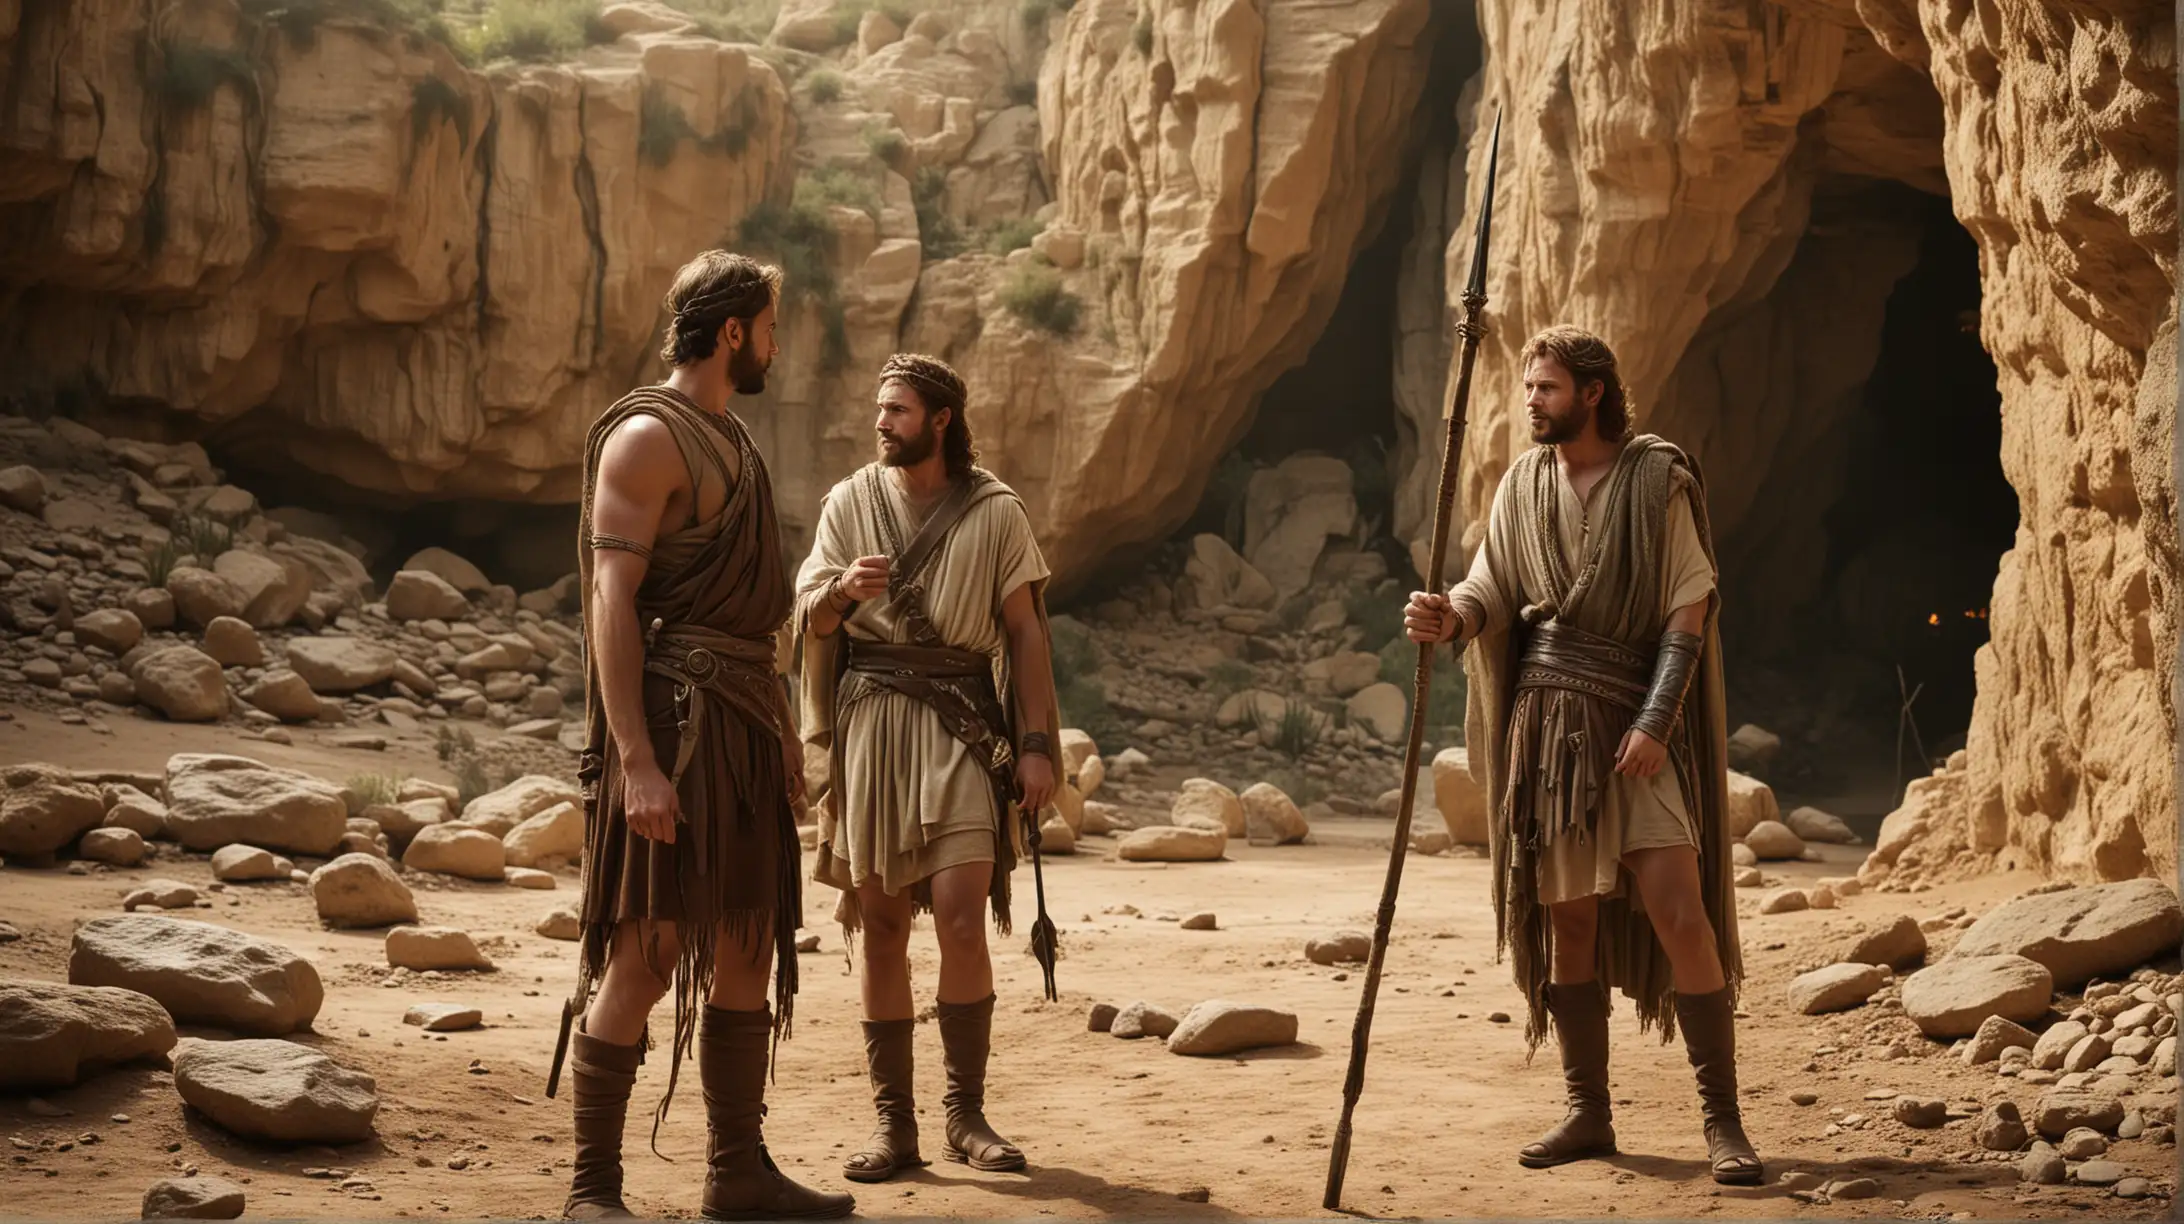 Young King David Confronts Saul with Spear at Cave Entrance